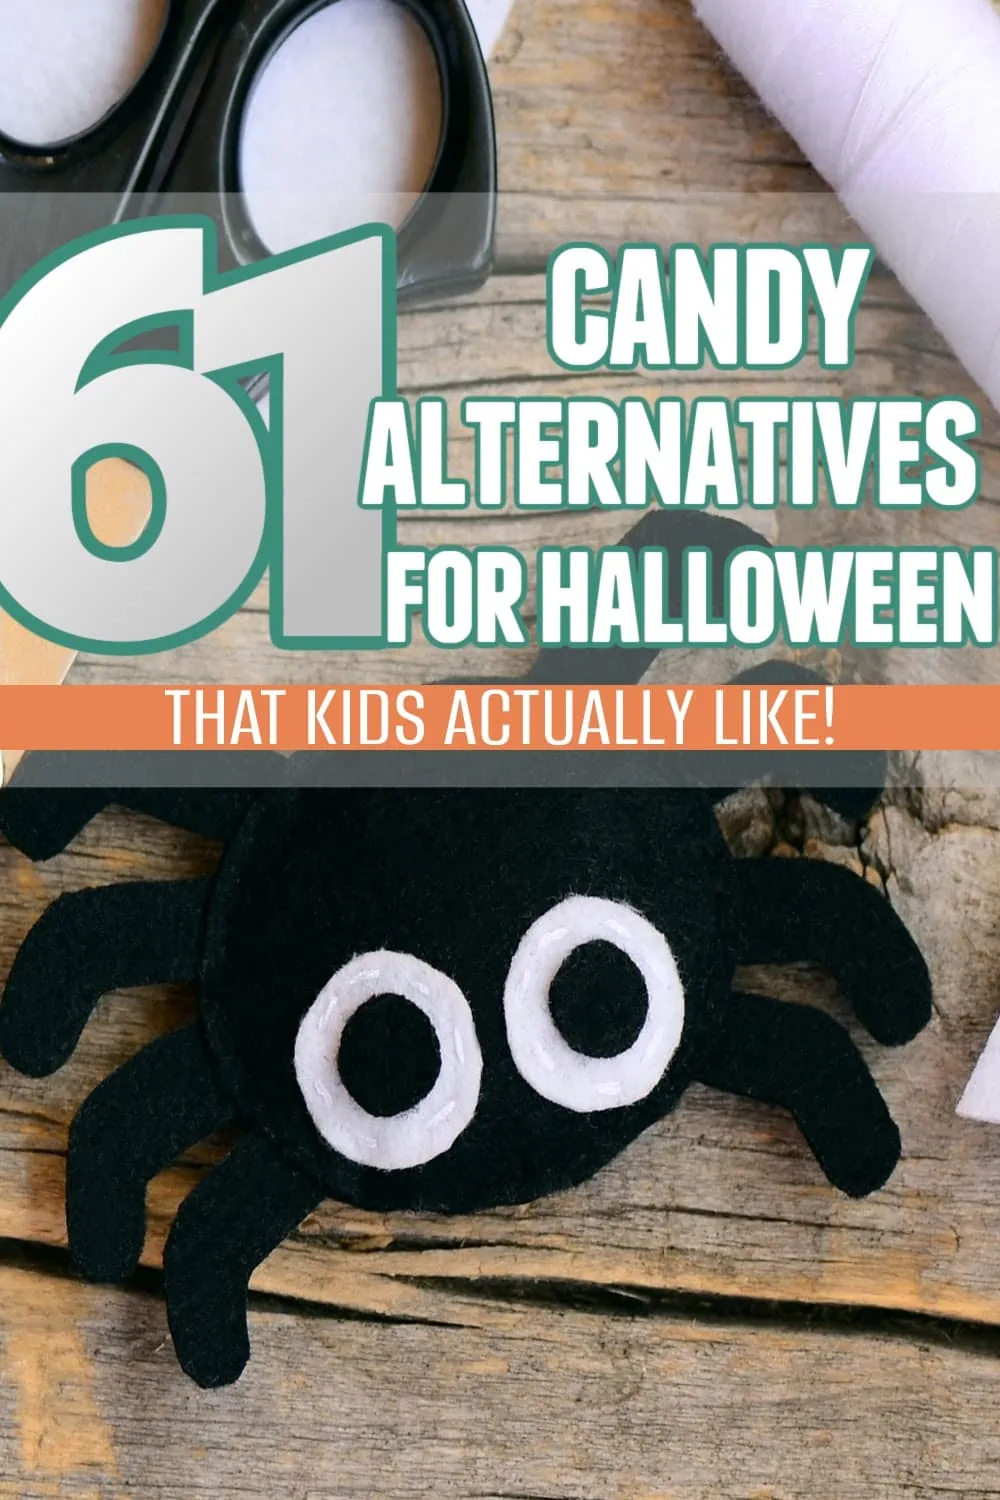 Image with large text that reads: "61 candy alternatives for Halloween treats that kids actually like." Underneath the text, there is a black felt spider with big white and black eyes. 